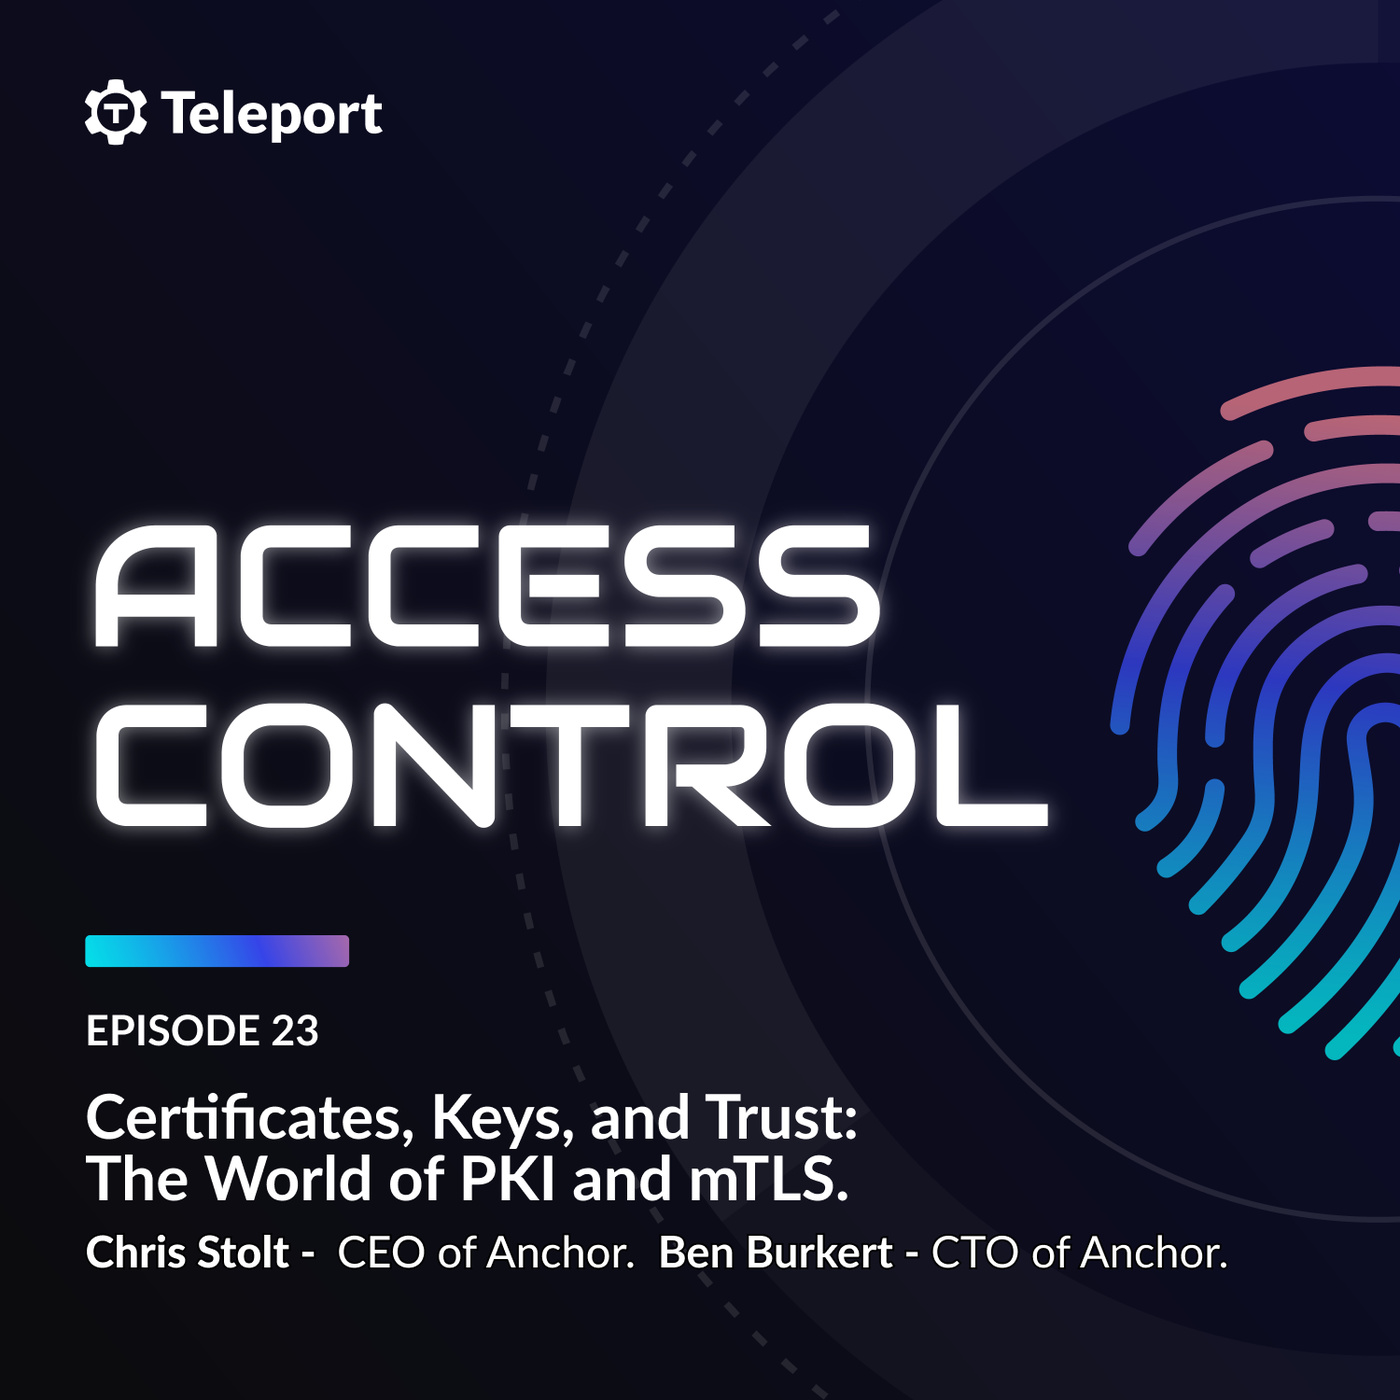 Certificates, Keys, and Trust: The World of PKI and mTLS.